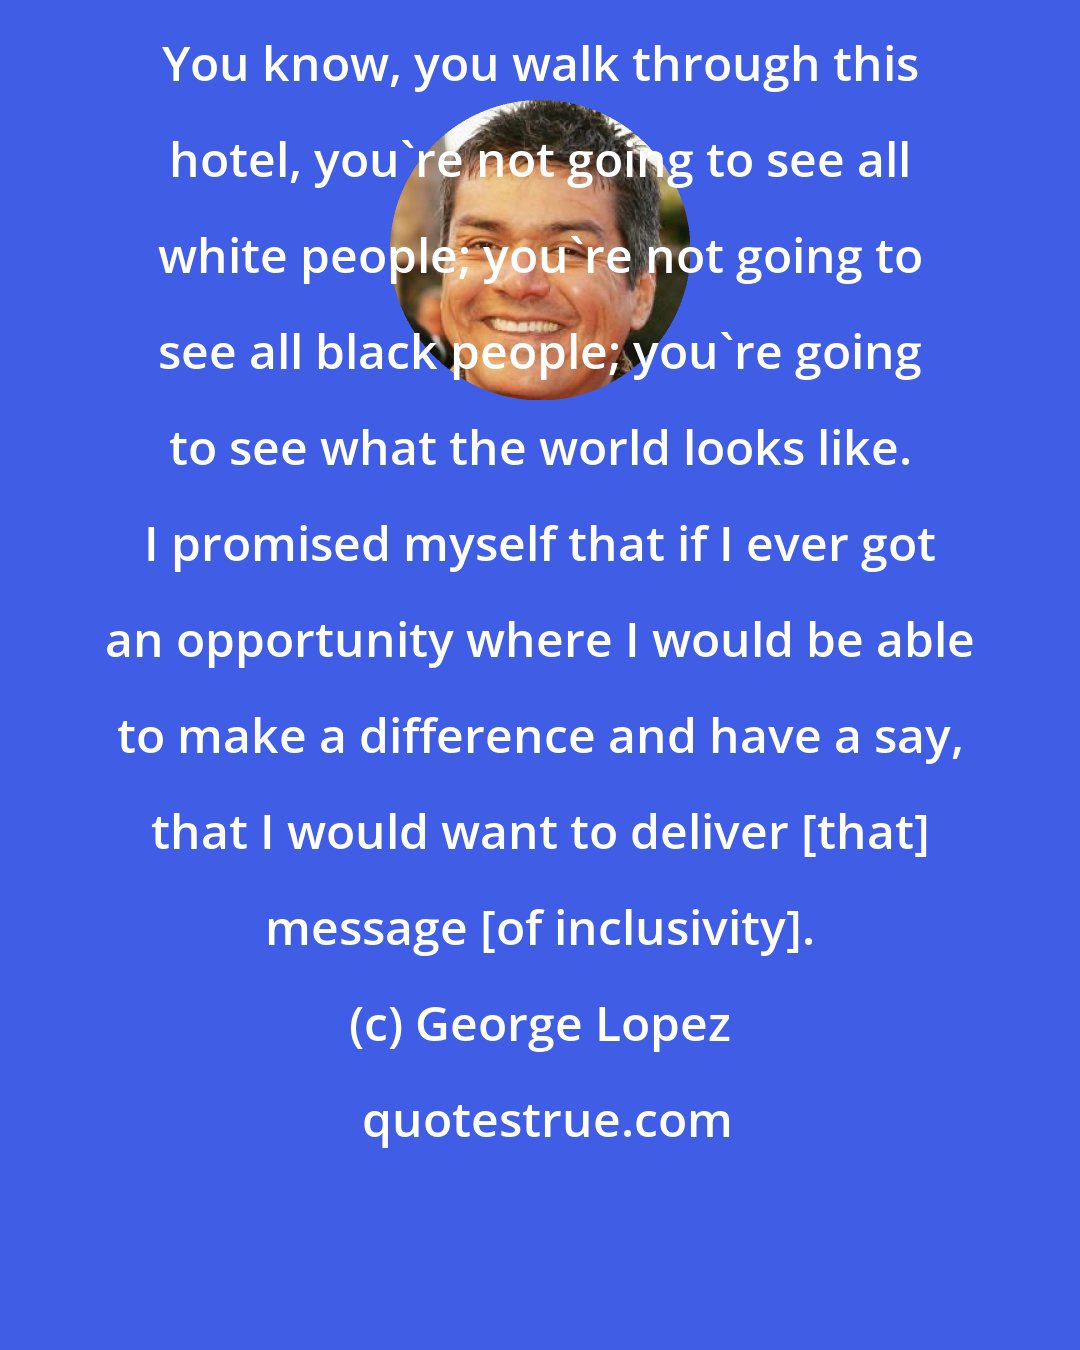 George Lopez: You know, you walk through this hotel, you're not going to see all white people; you're not going to see all black people; you're going to see what the world looks like. I promised myself that if I ever got an opportunity where I would be able to make a difference and have a say, that I would want to deliver [that] message [of inclusivity].